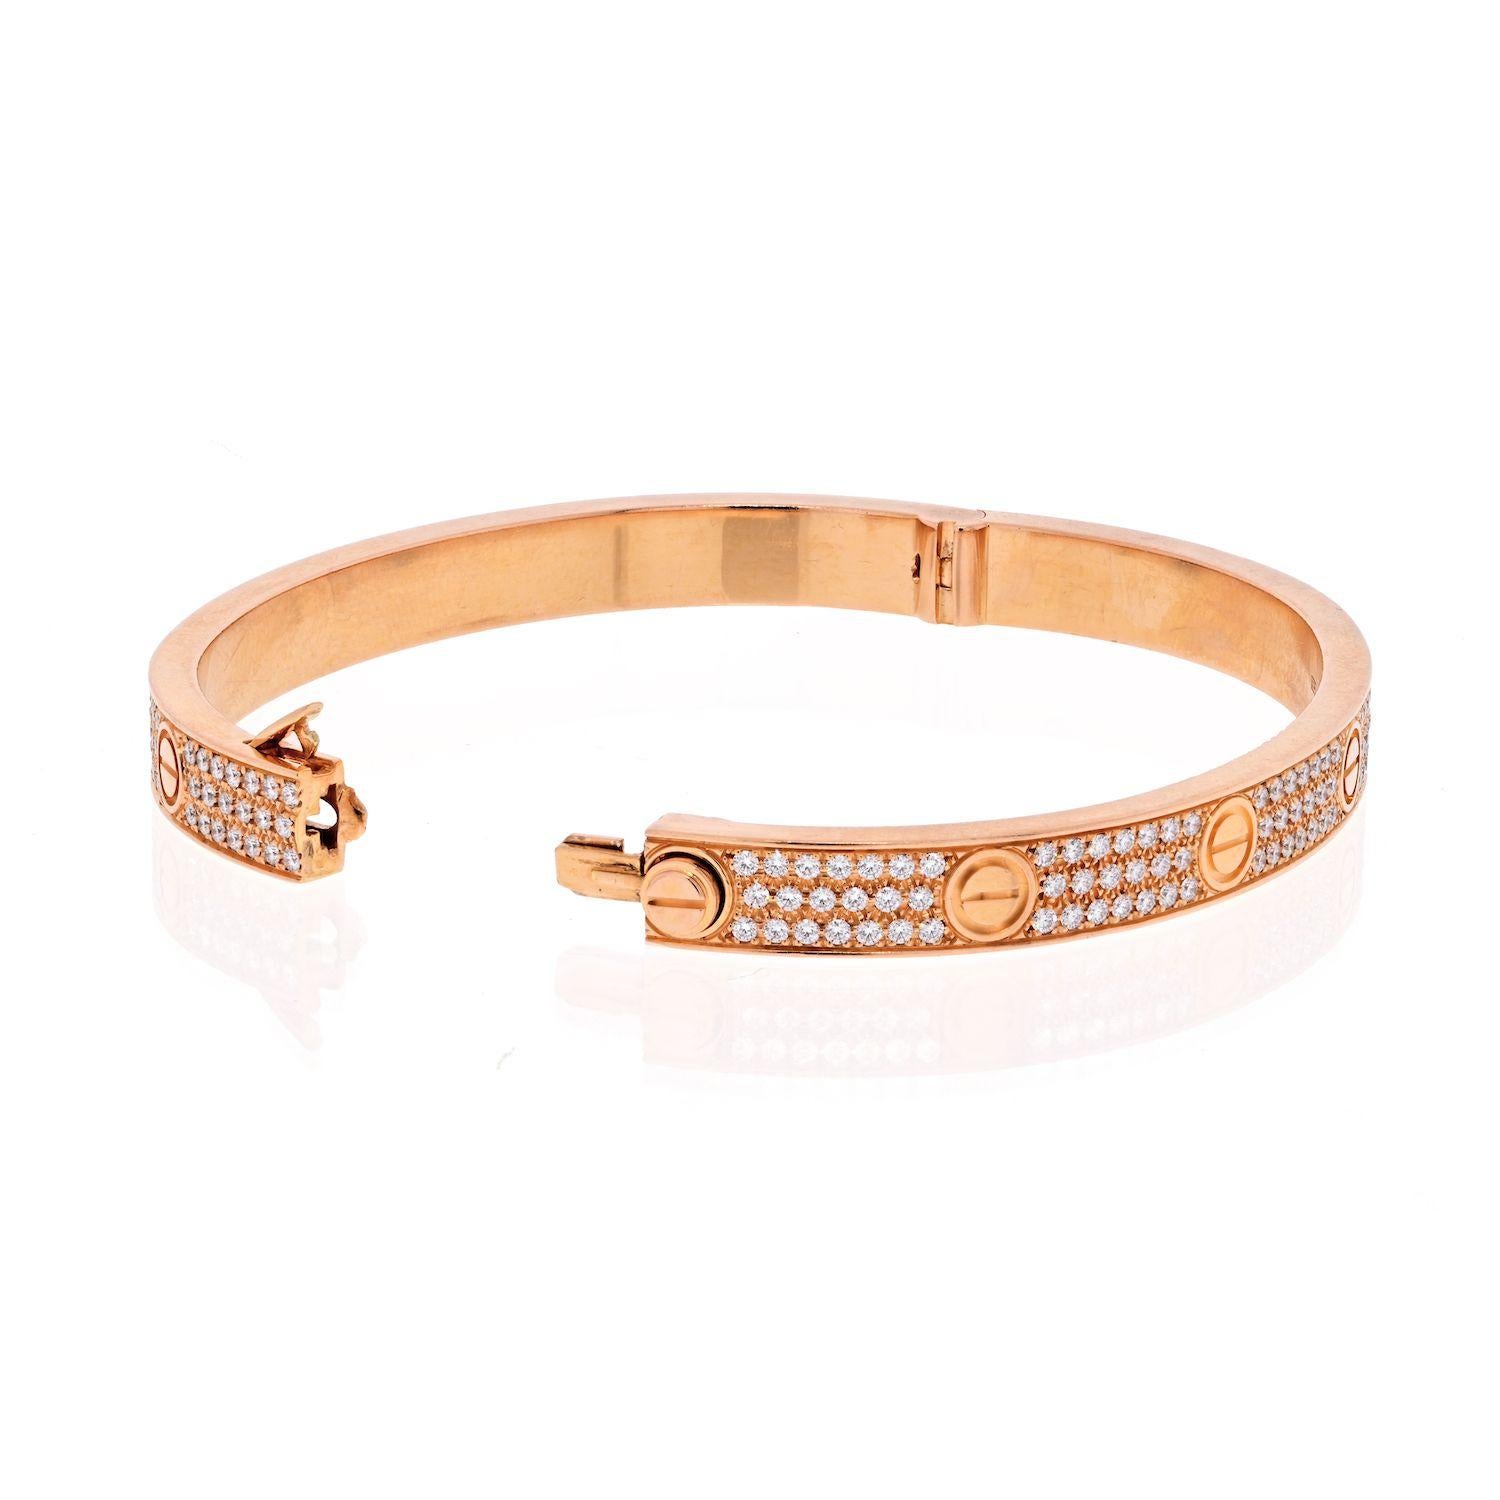 Cartier 18K Rose Gold Pave Love Bangle Size 19 Bracelet.
The bracelet is crafted of 18 karat rose gold and features the signature engraved LOVE motif centered between pave set round brilliant cut diamonds, approximately 3.40 total carat weight.